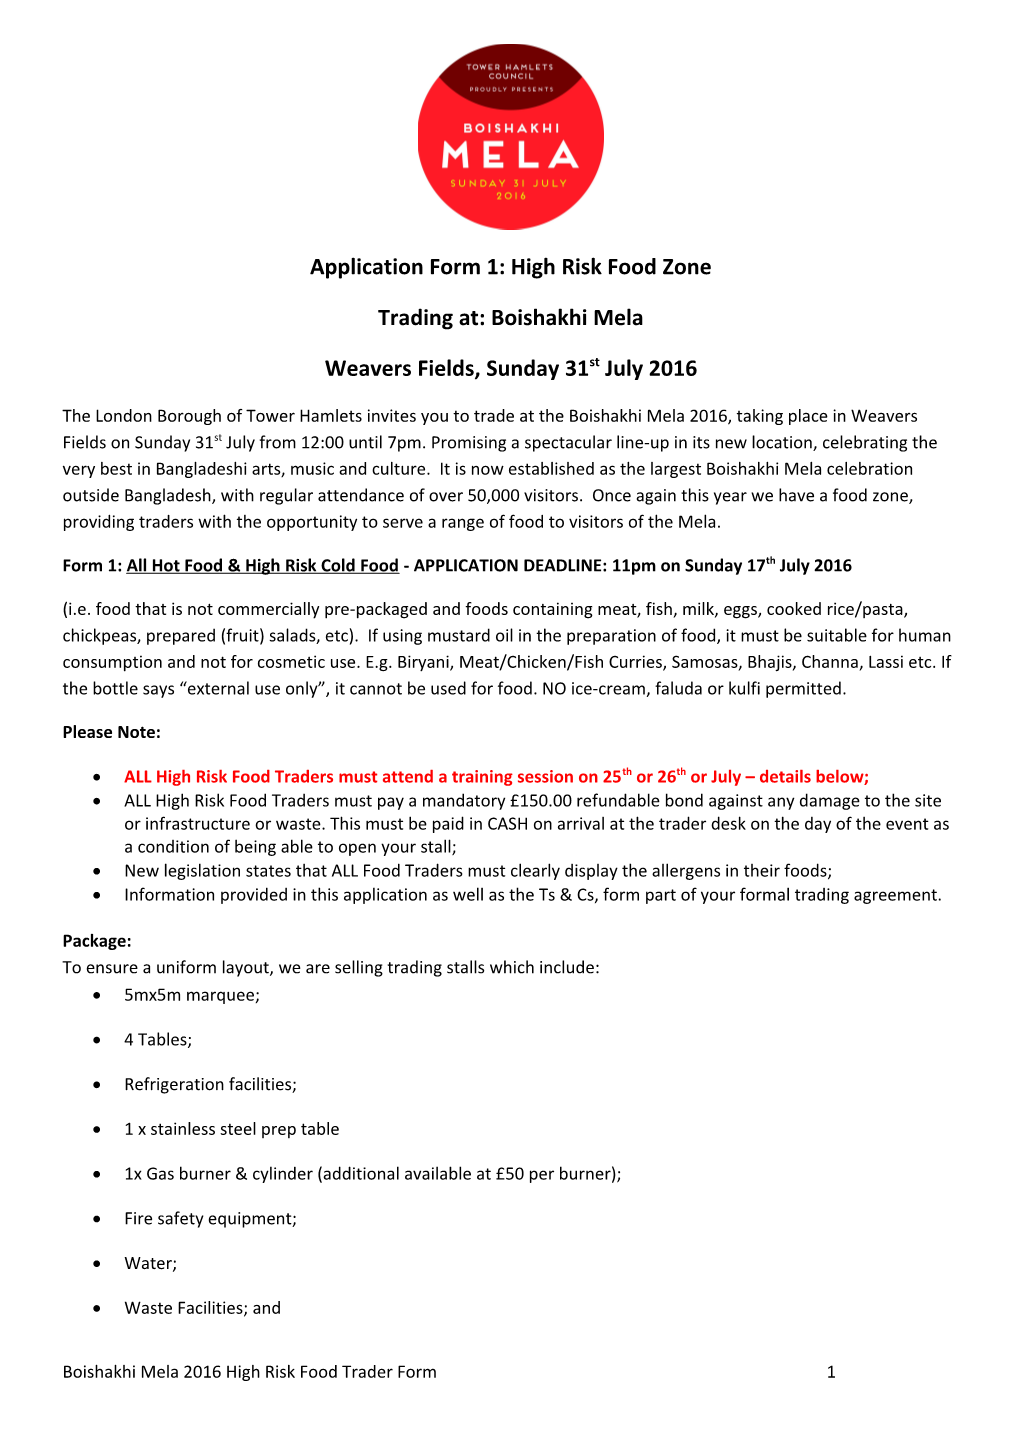 Application Form 1: High Risk Food Zone